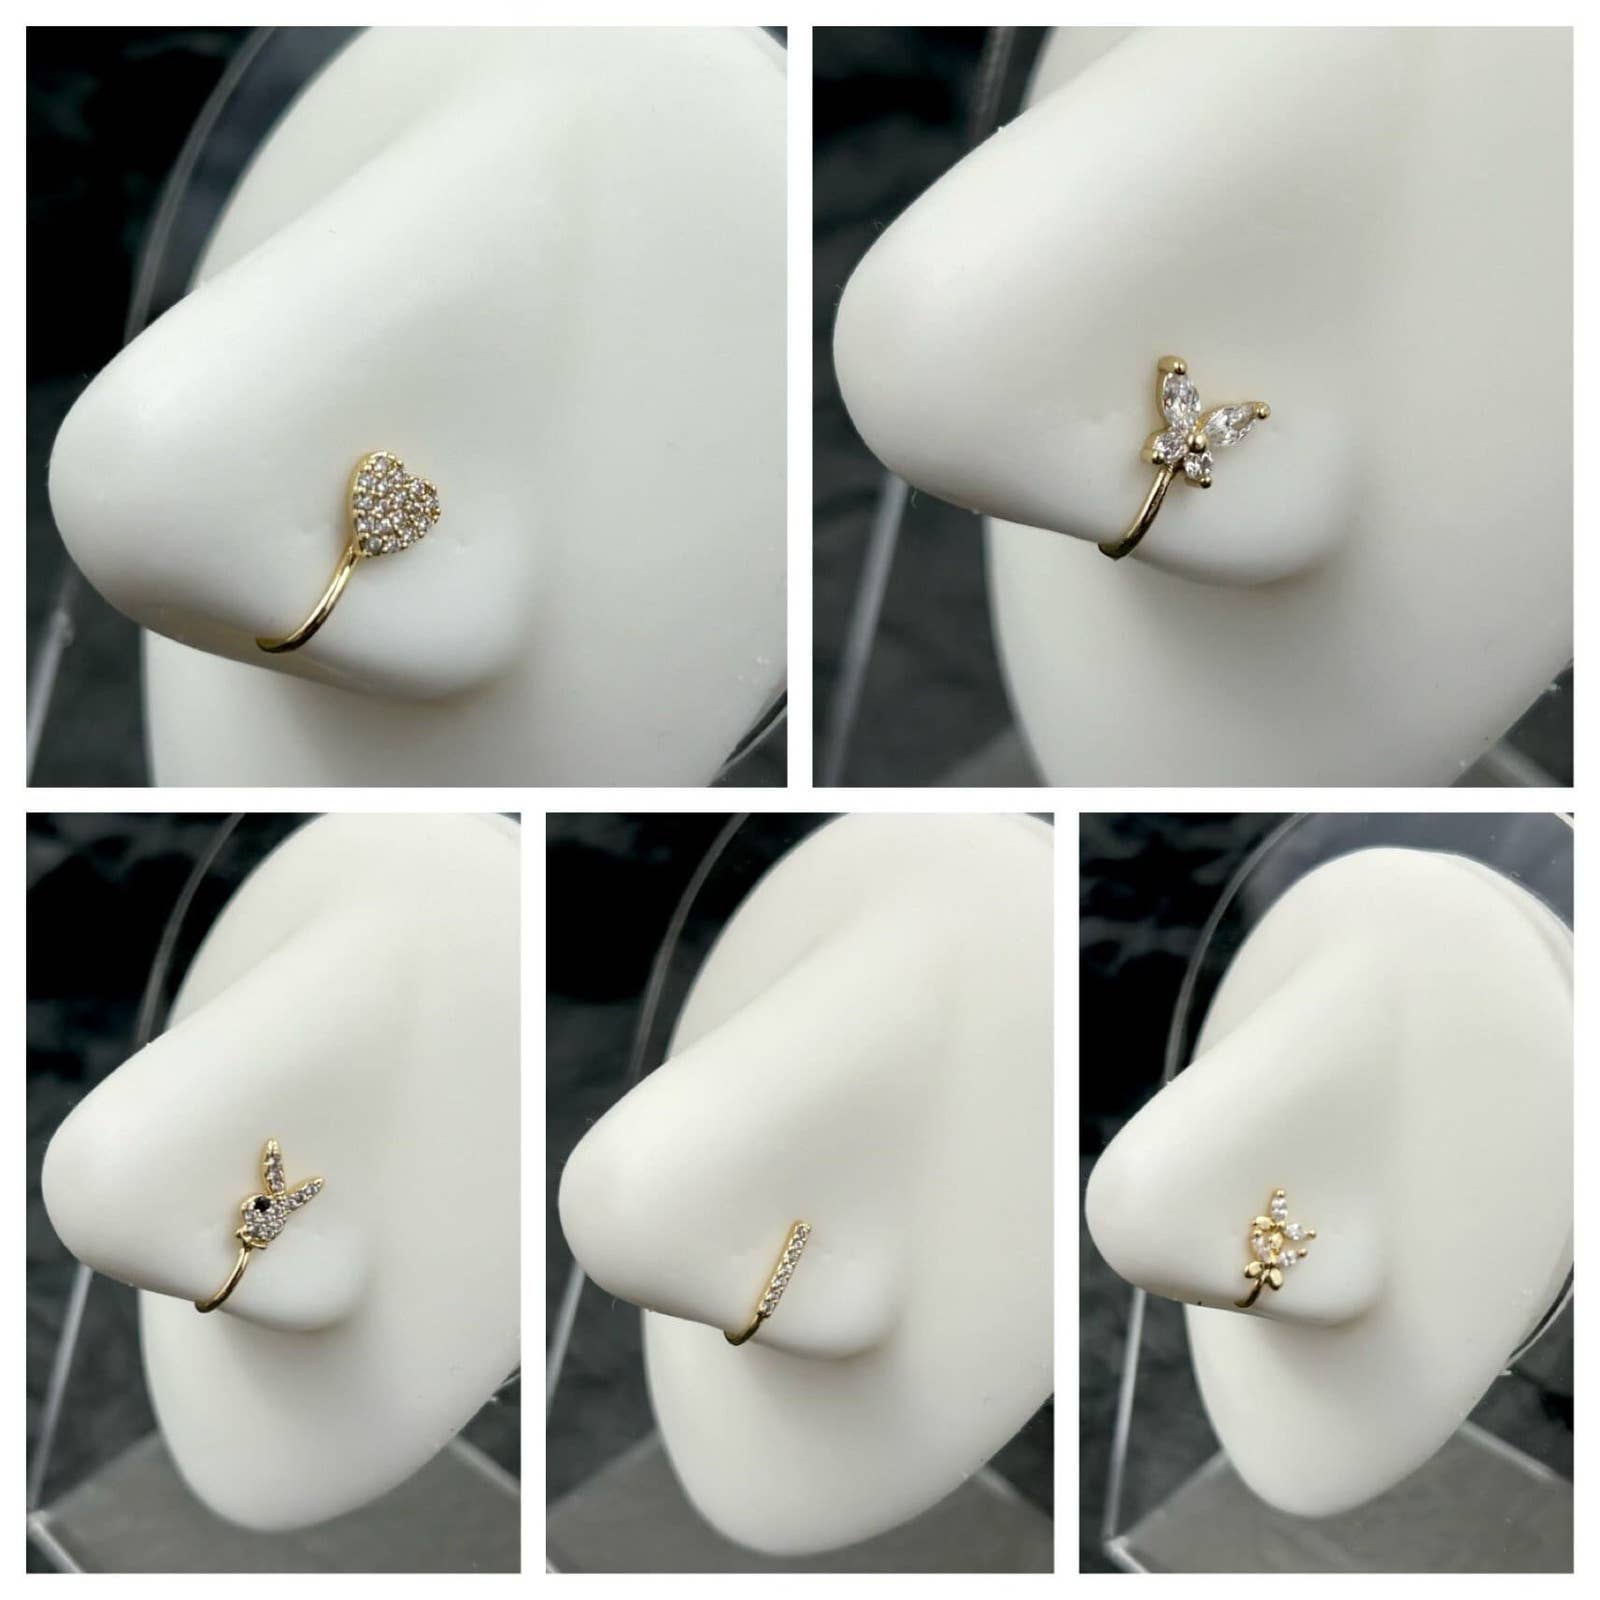 Butterfly Nose Clip - Fake Nose Cuff